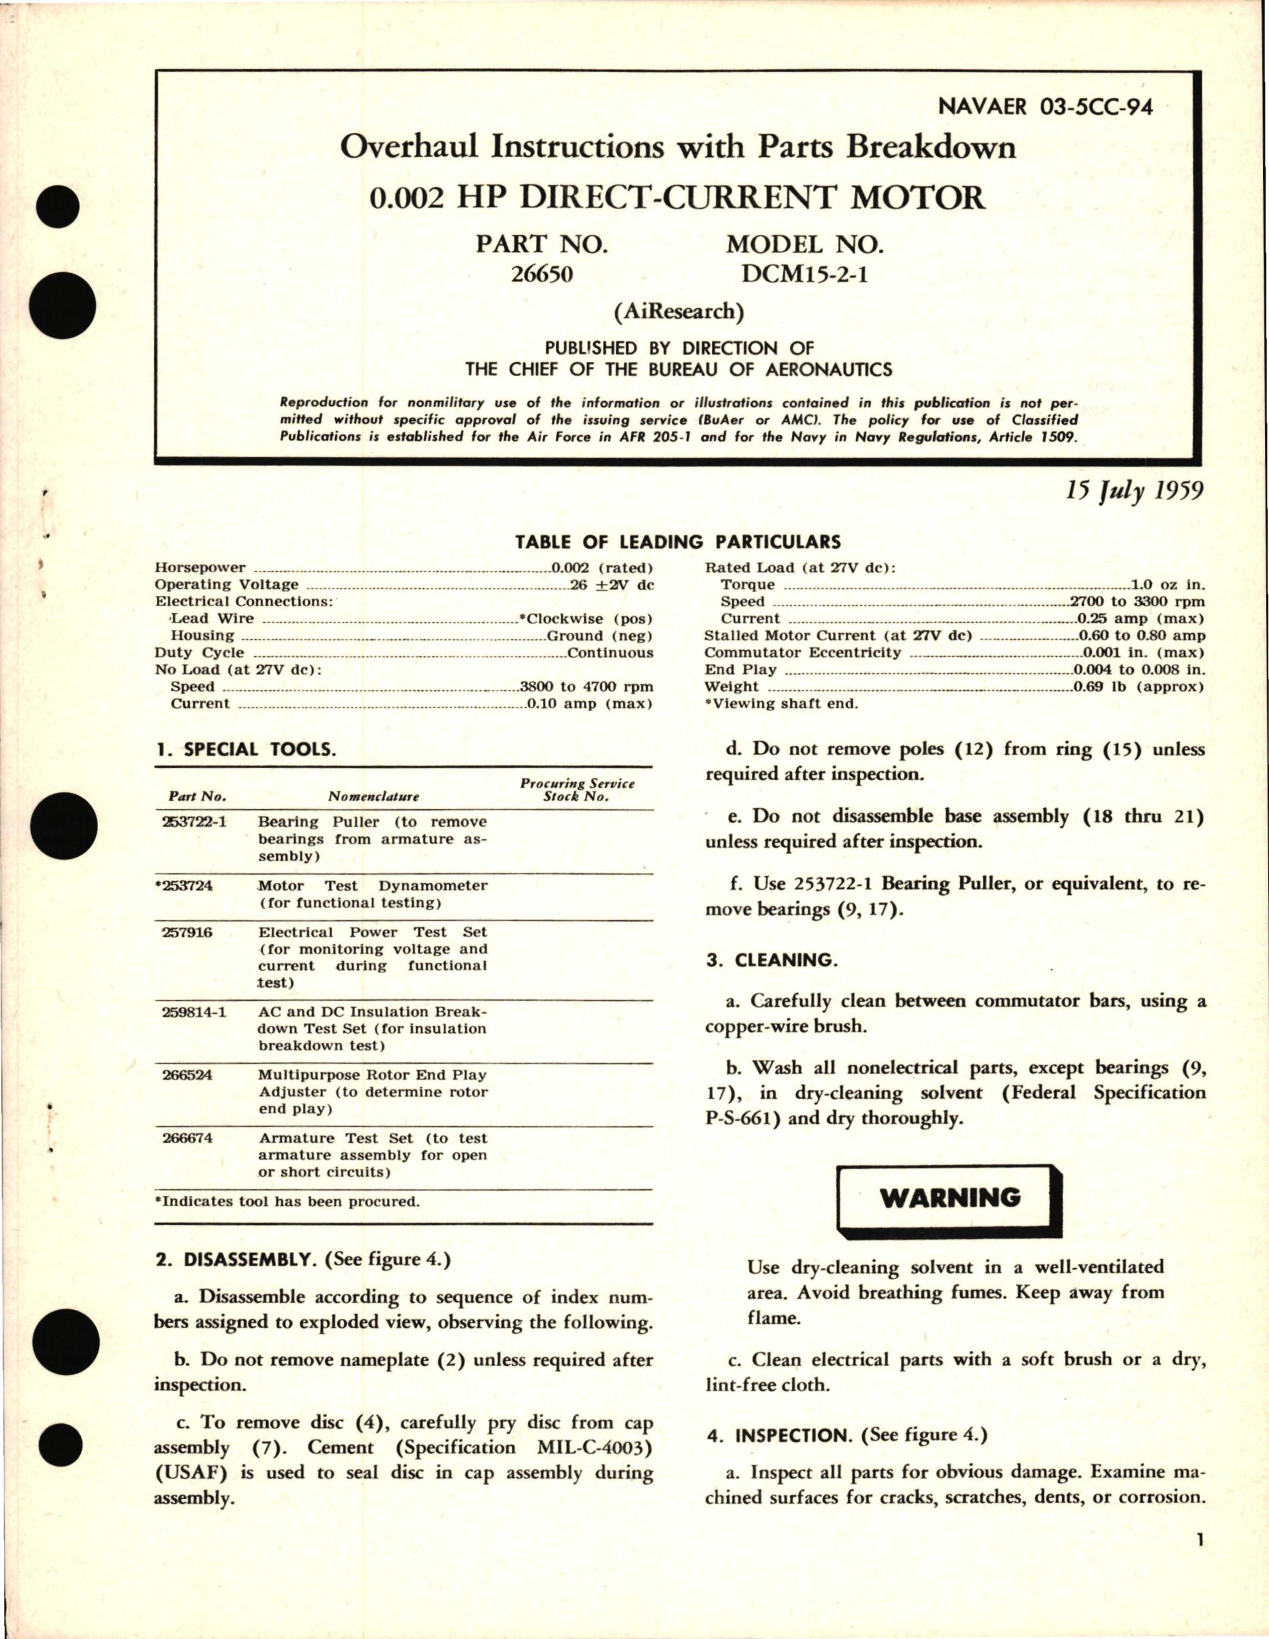 Sample page 1 from AirCorps Library document: Overhaul Instructions w Parts Breakdown for HP Direct Current Motor 0.002 Part 26650